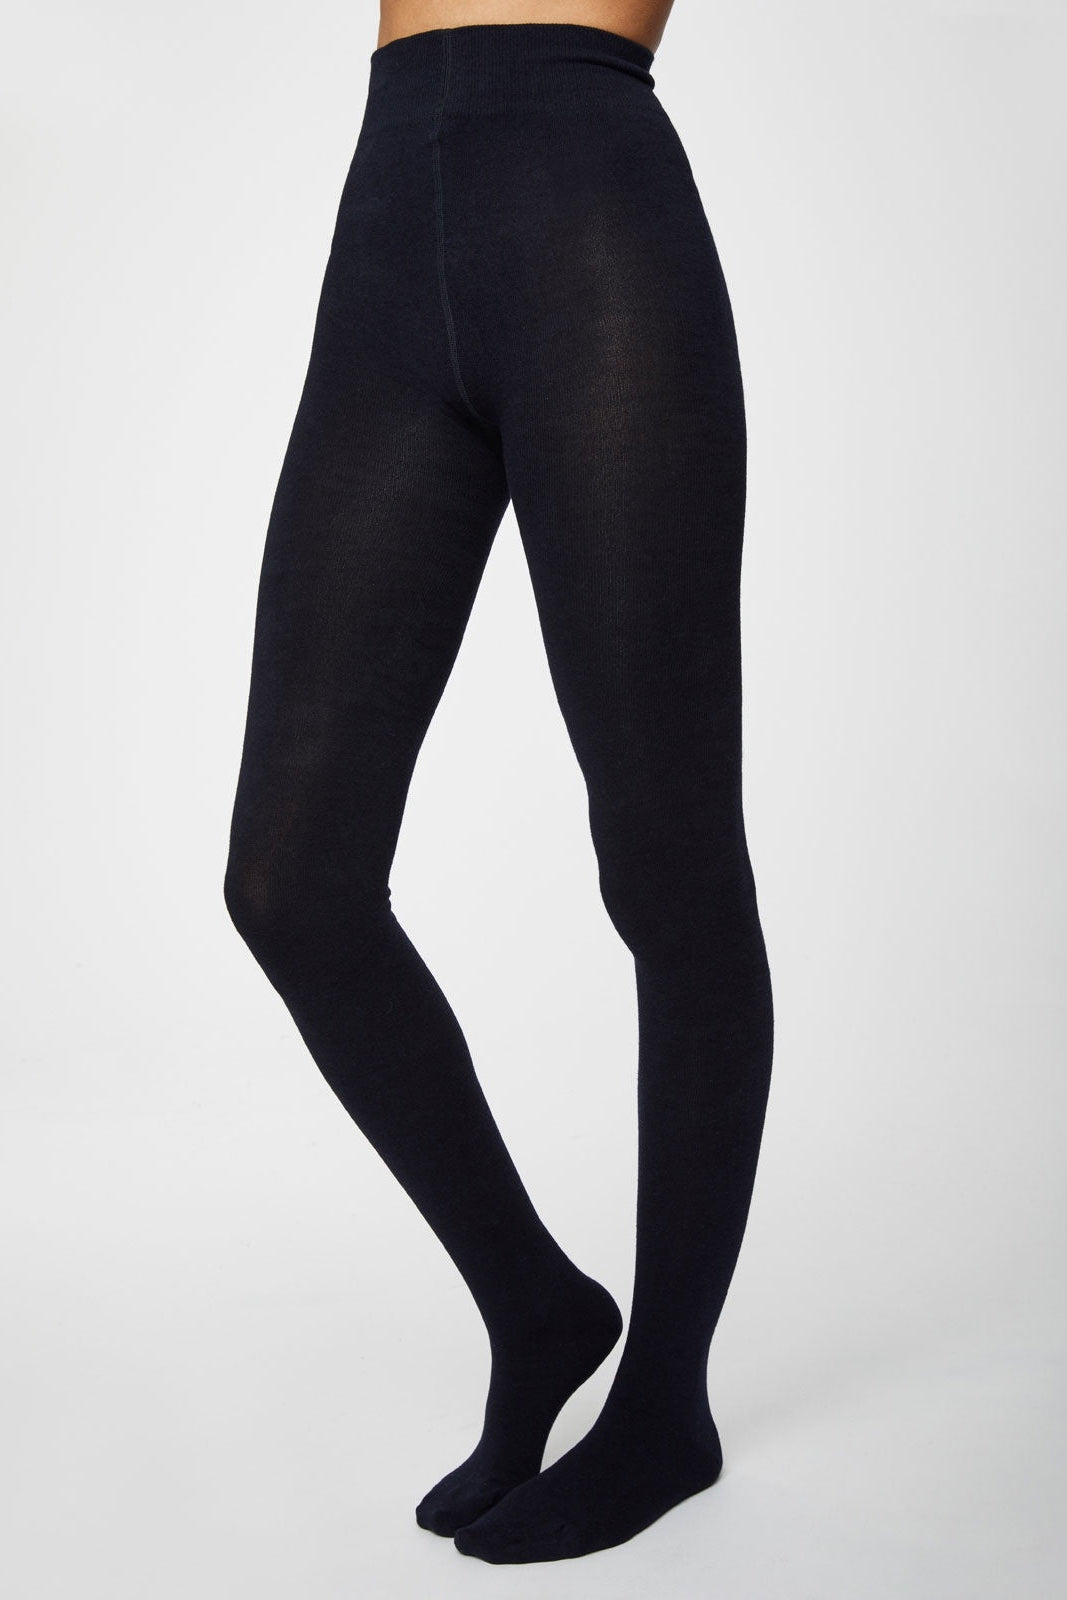 Thought Elgin Tights-Womens-Ohh! By Gum - Shop Sustainable